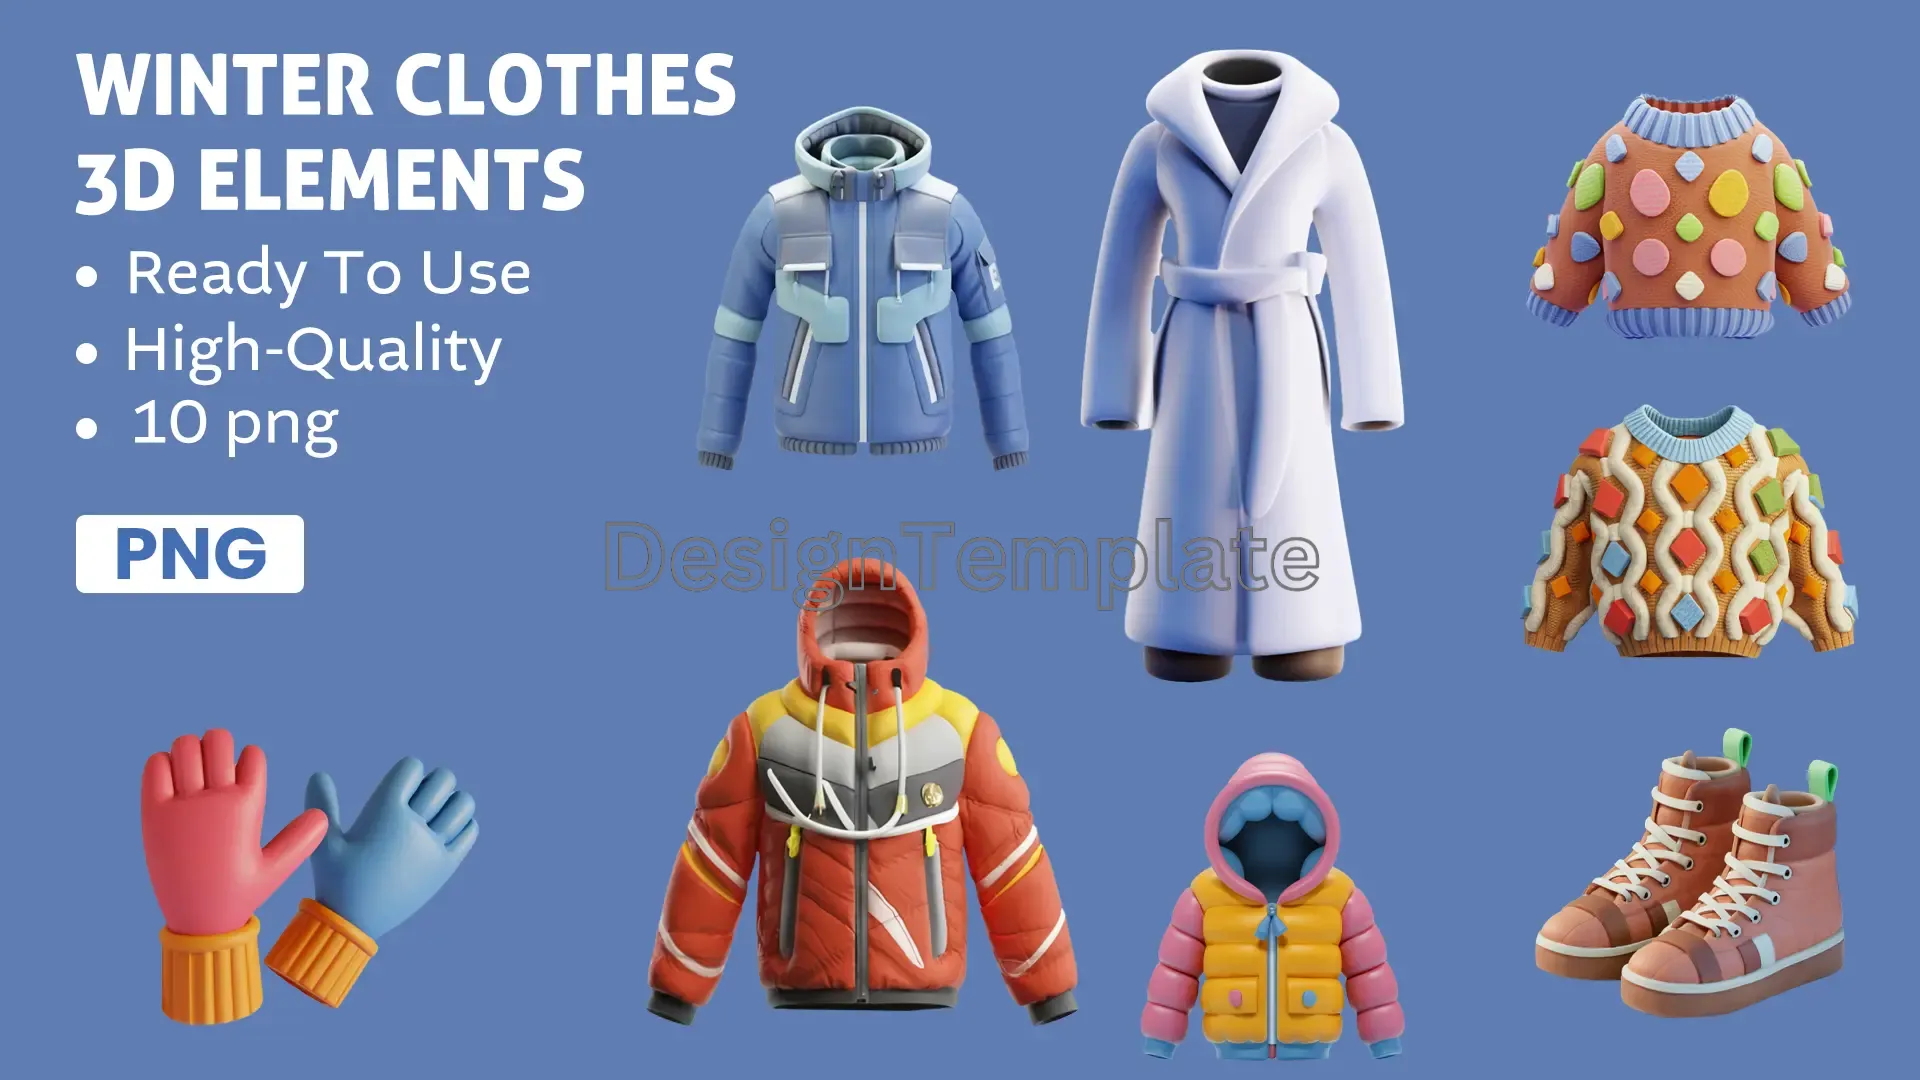 Winter Outfits 3D Elements Pack